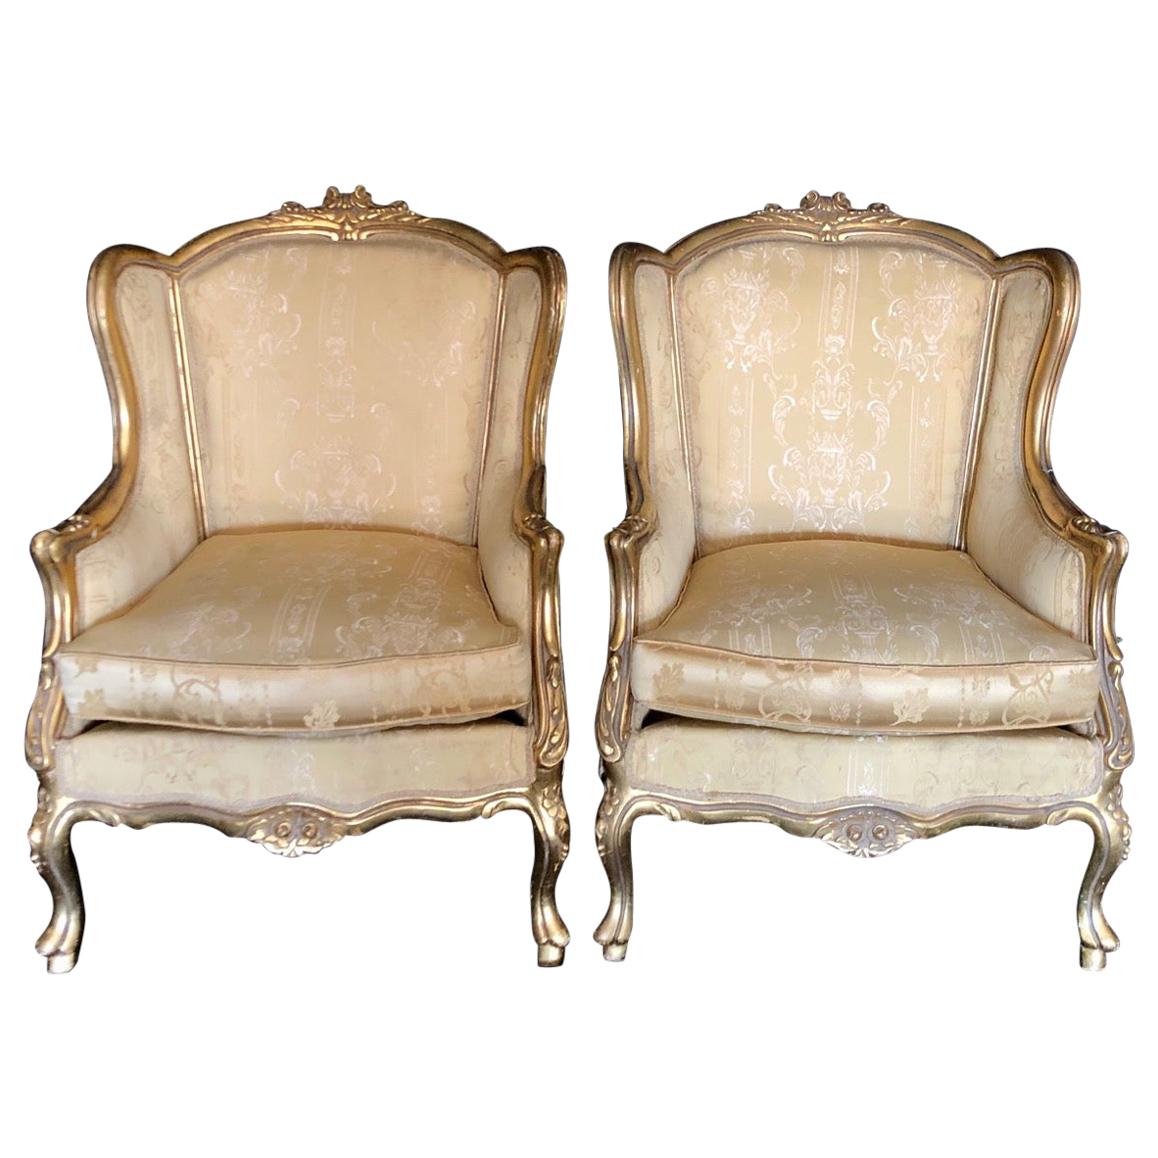 Classic Pair of Louis XV Style Giltwood Bergeres Armchairs